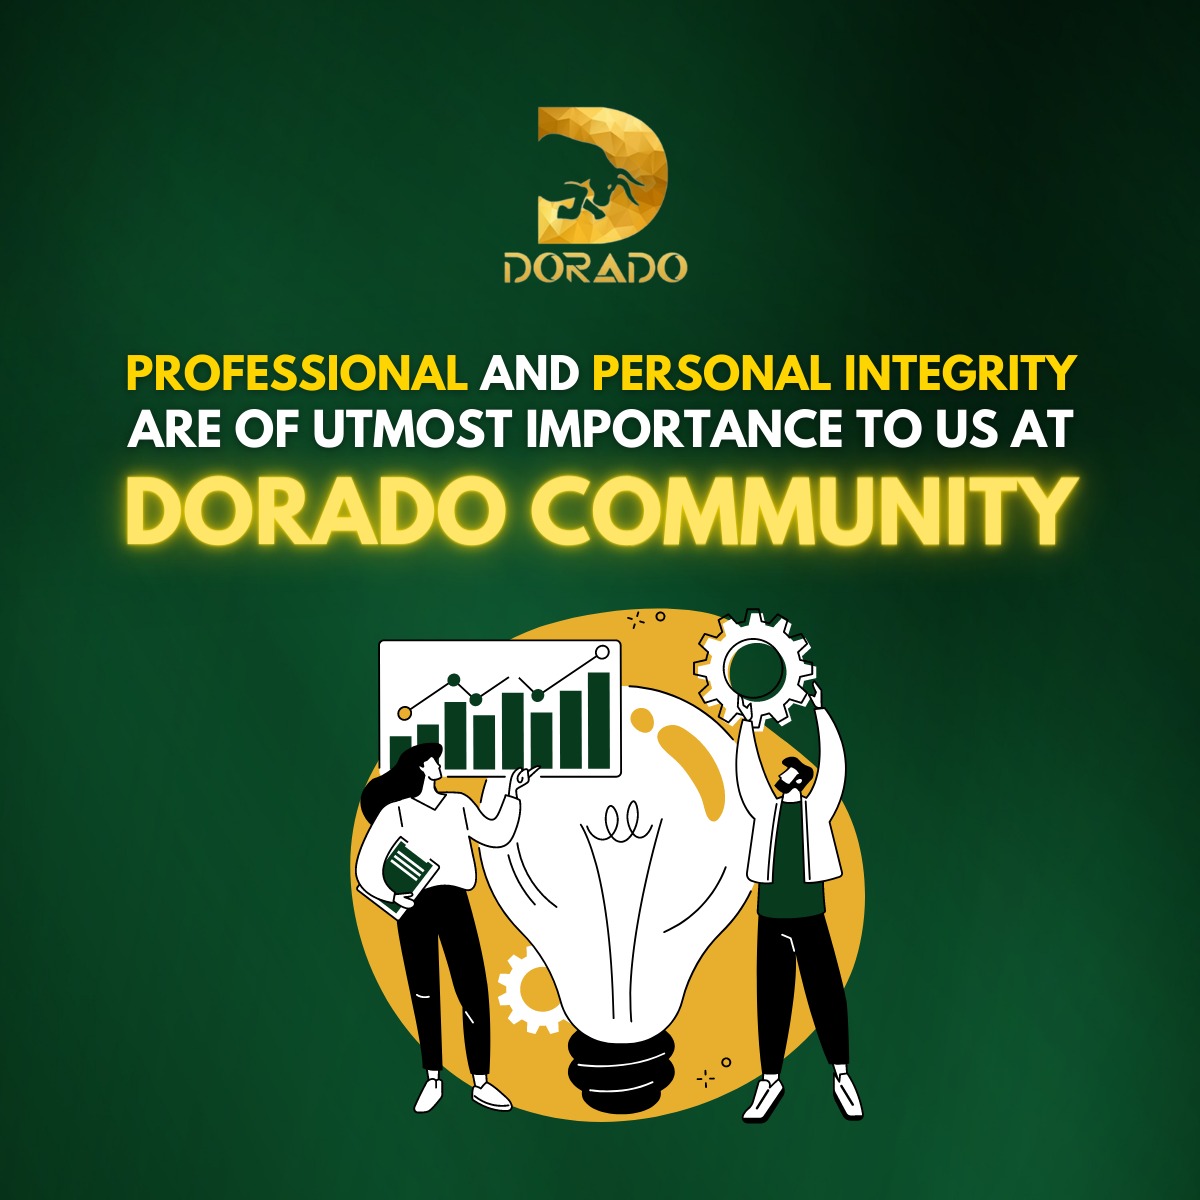 Dorado Community places great emphasis on maintaining a culture of professional and personal integrity.

#doradocommunity #integritymatters #professionalintegrity #personalintegrity #ethicalculture #valuesfirst #integritydriven #accountabilitymatters #ethicalleadership #dorado